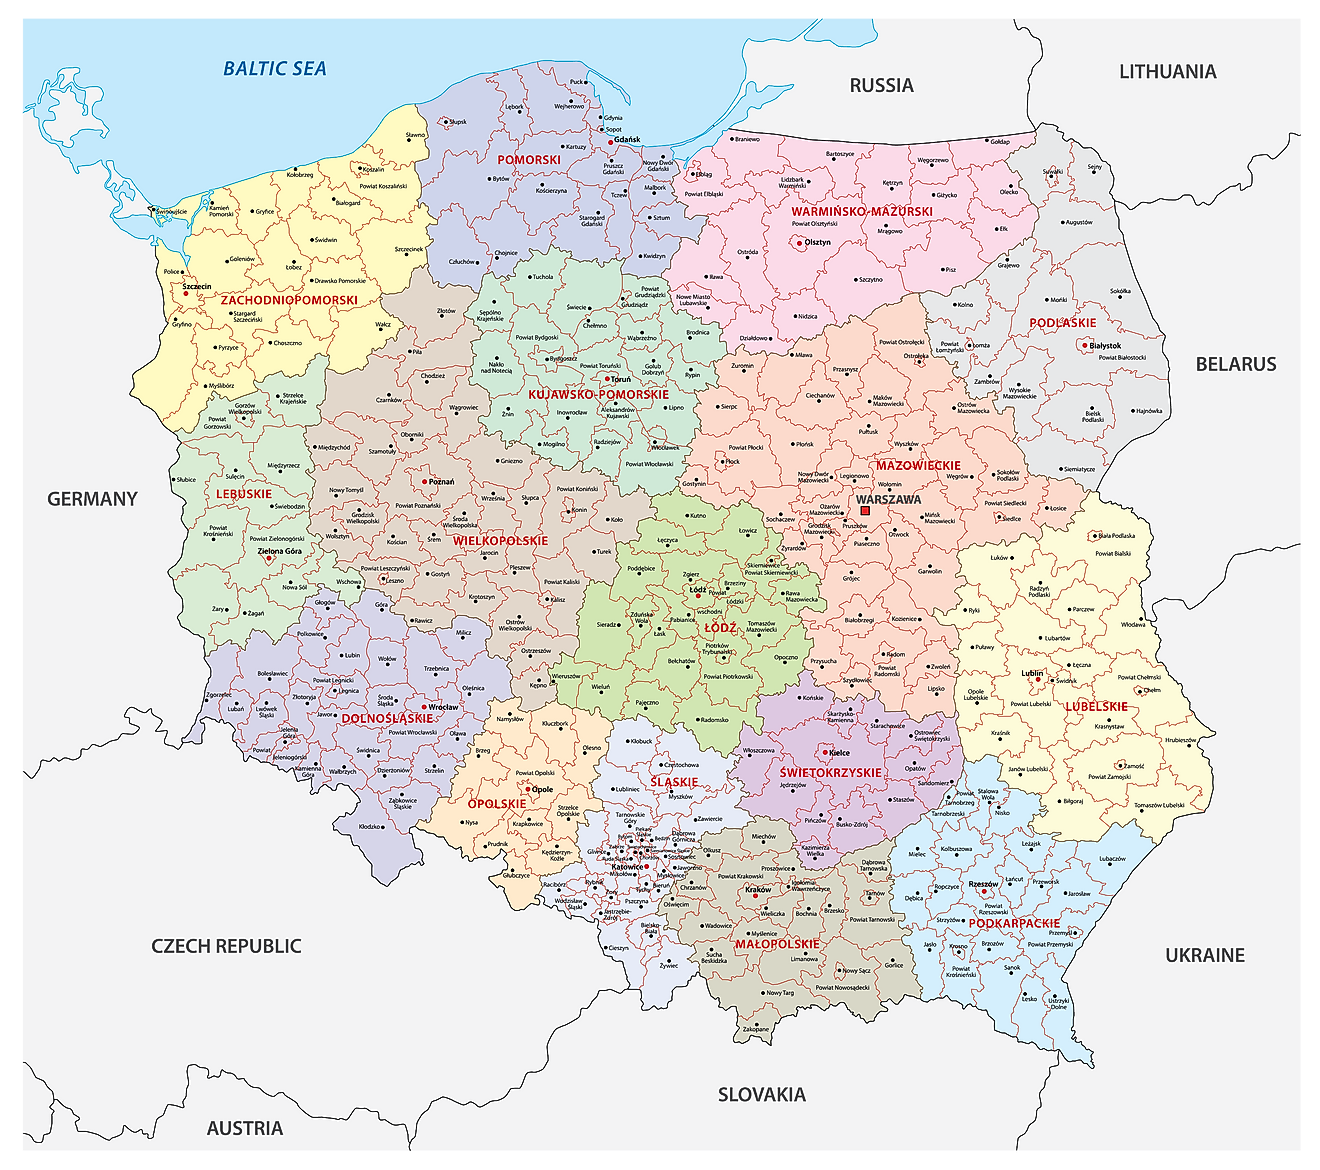 Political Map of Poland showing its 16 voivodeships and the capital city Warsaw.